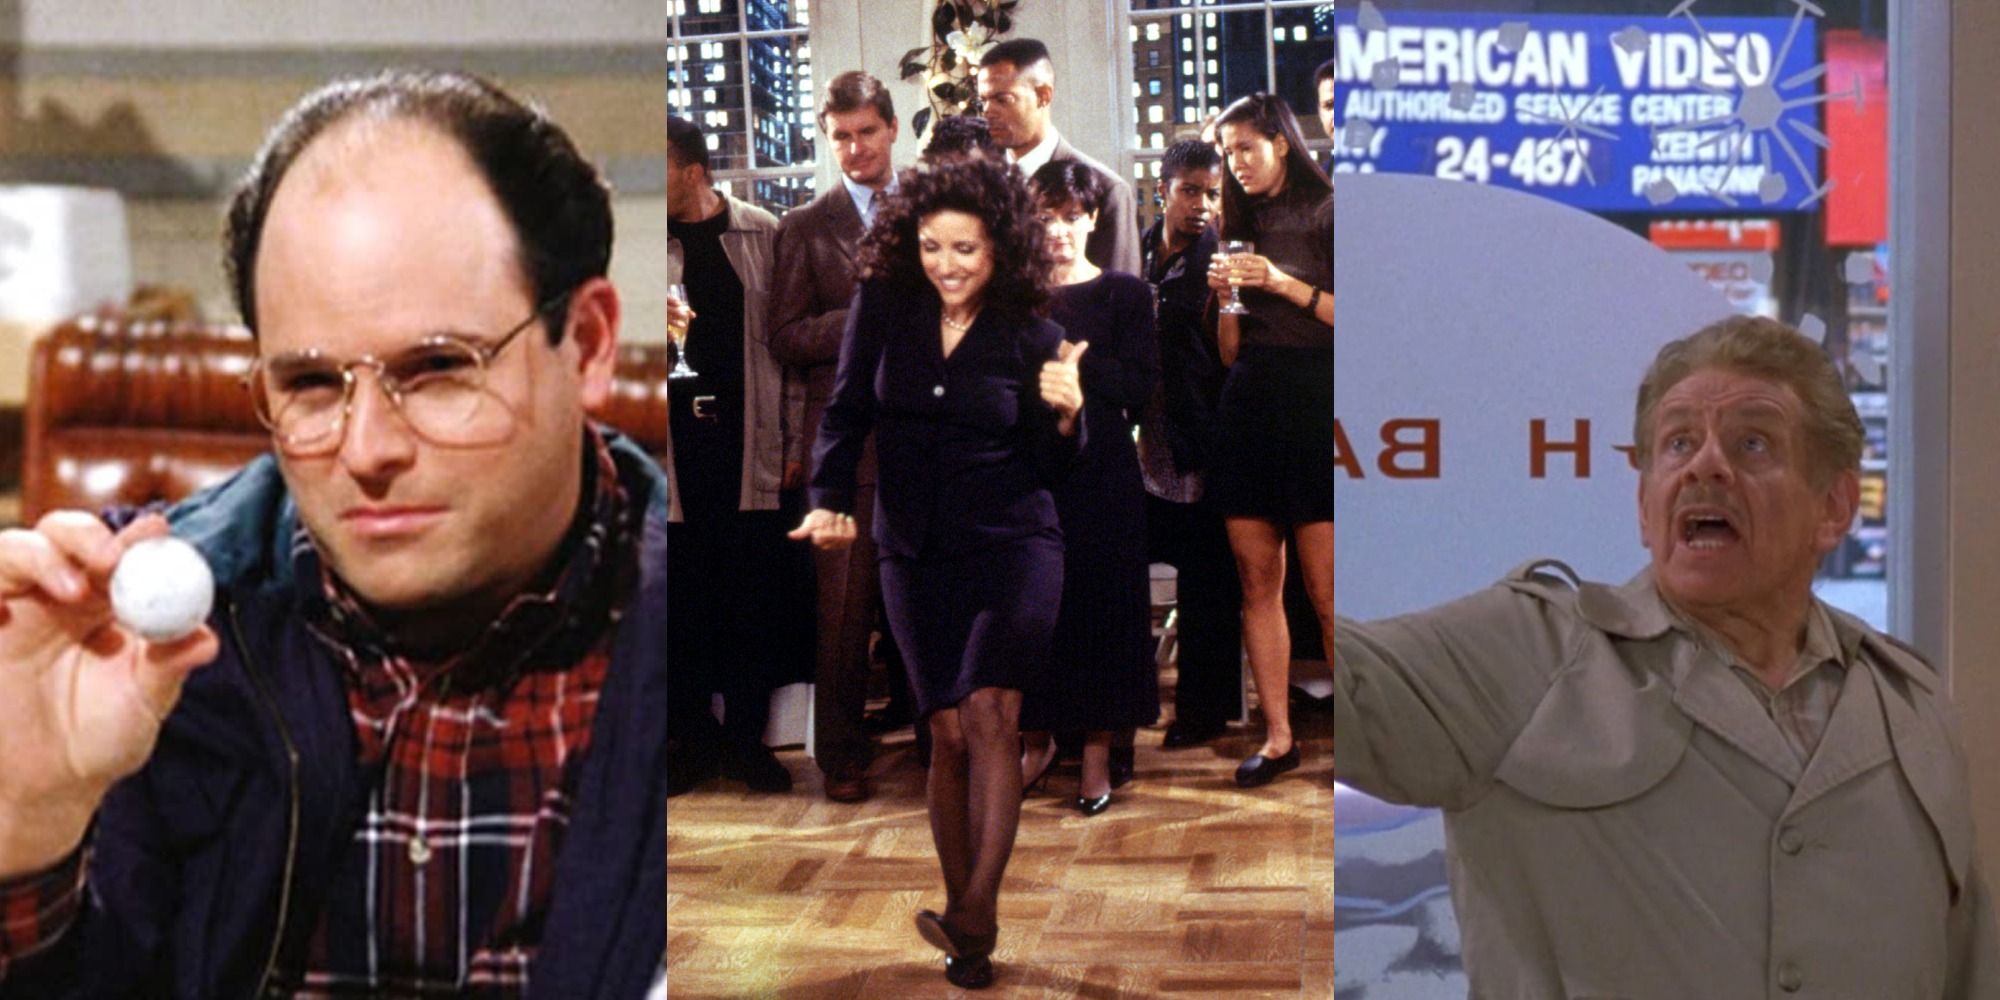 Main feature image showing George Elaine and Kramer in Seinfeld